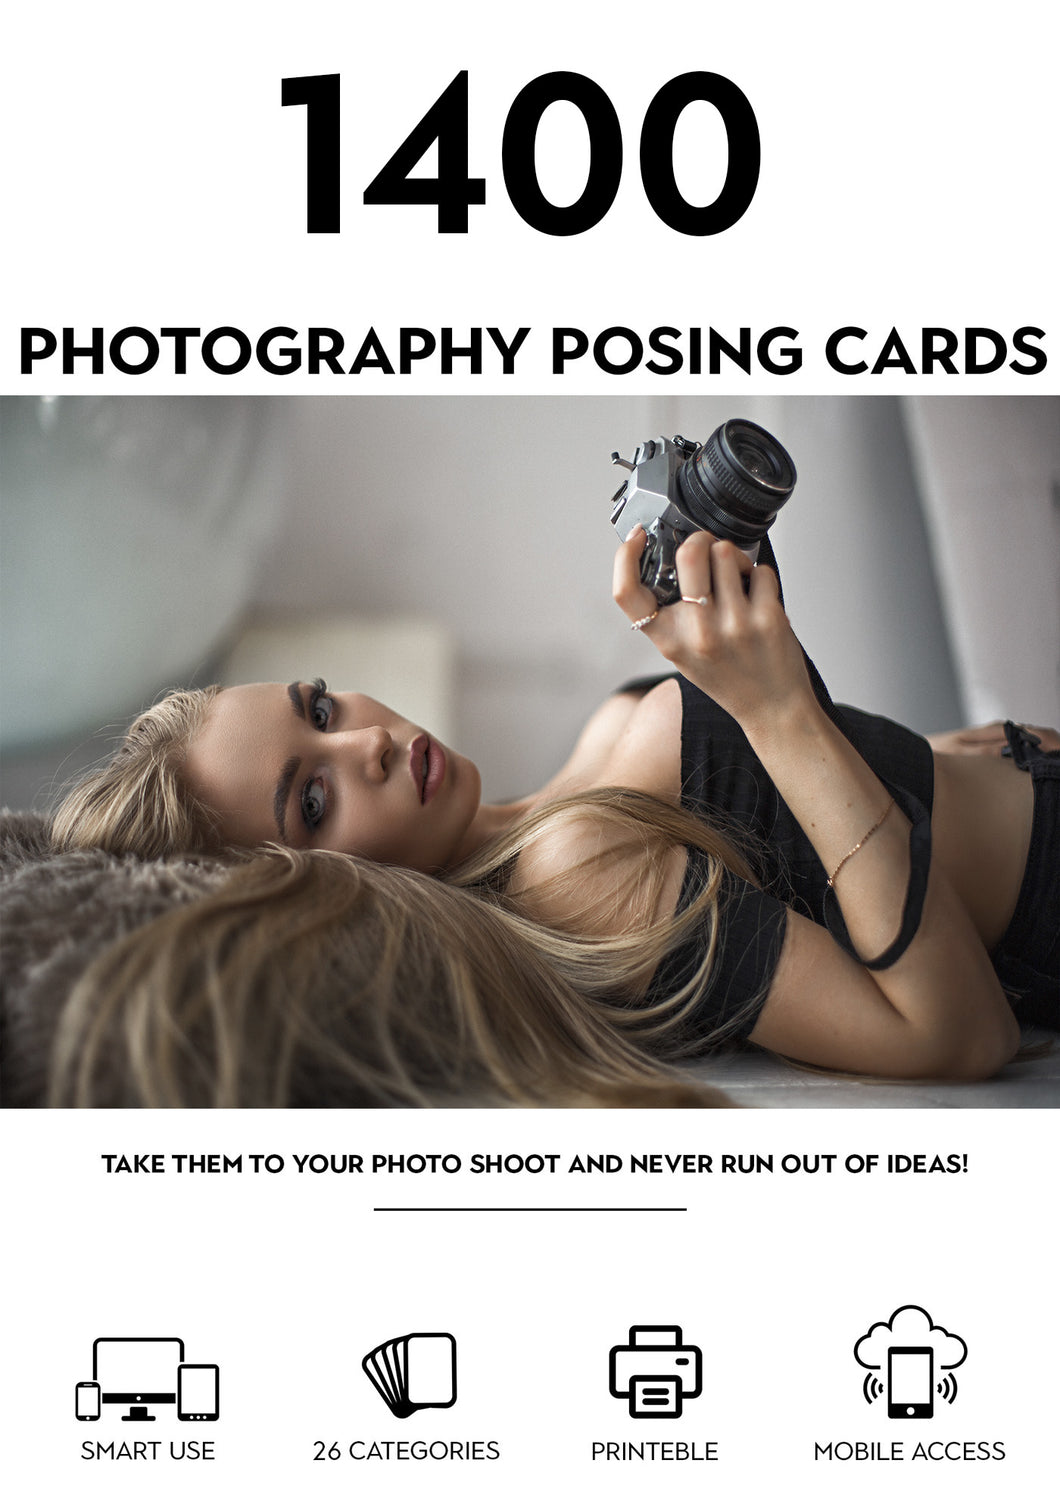 1400 Photography Posing Cards